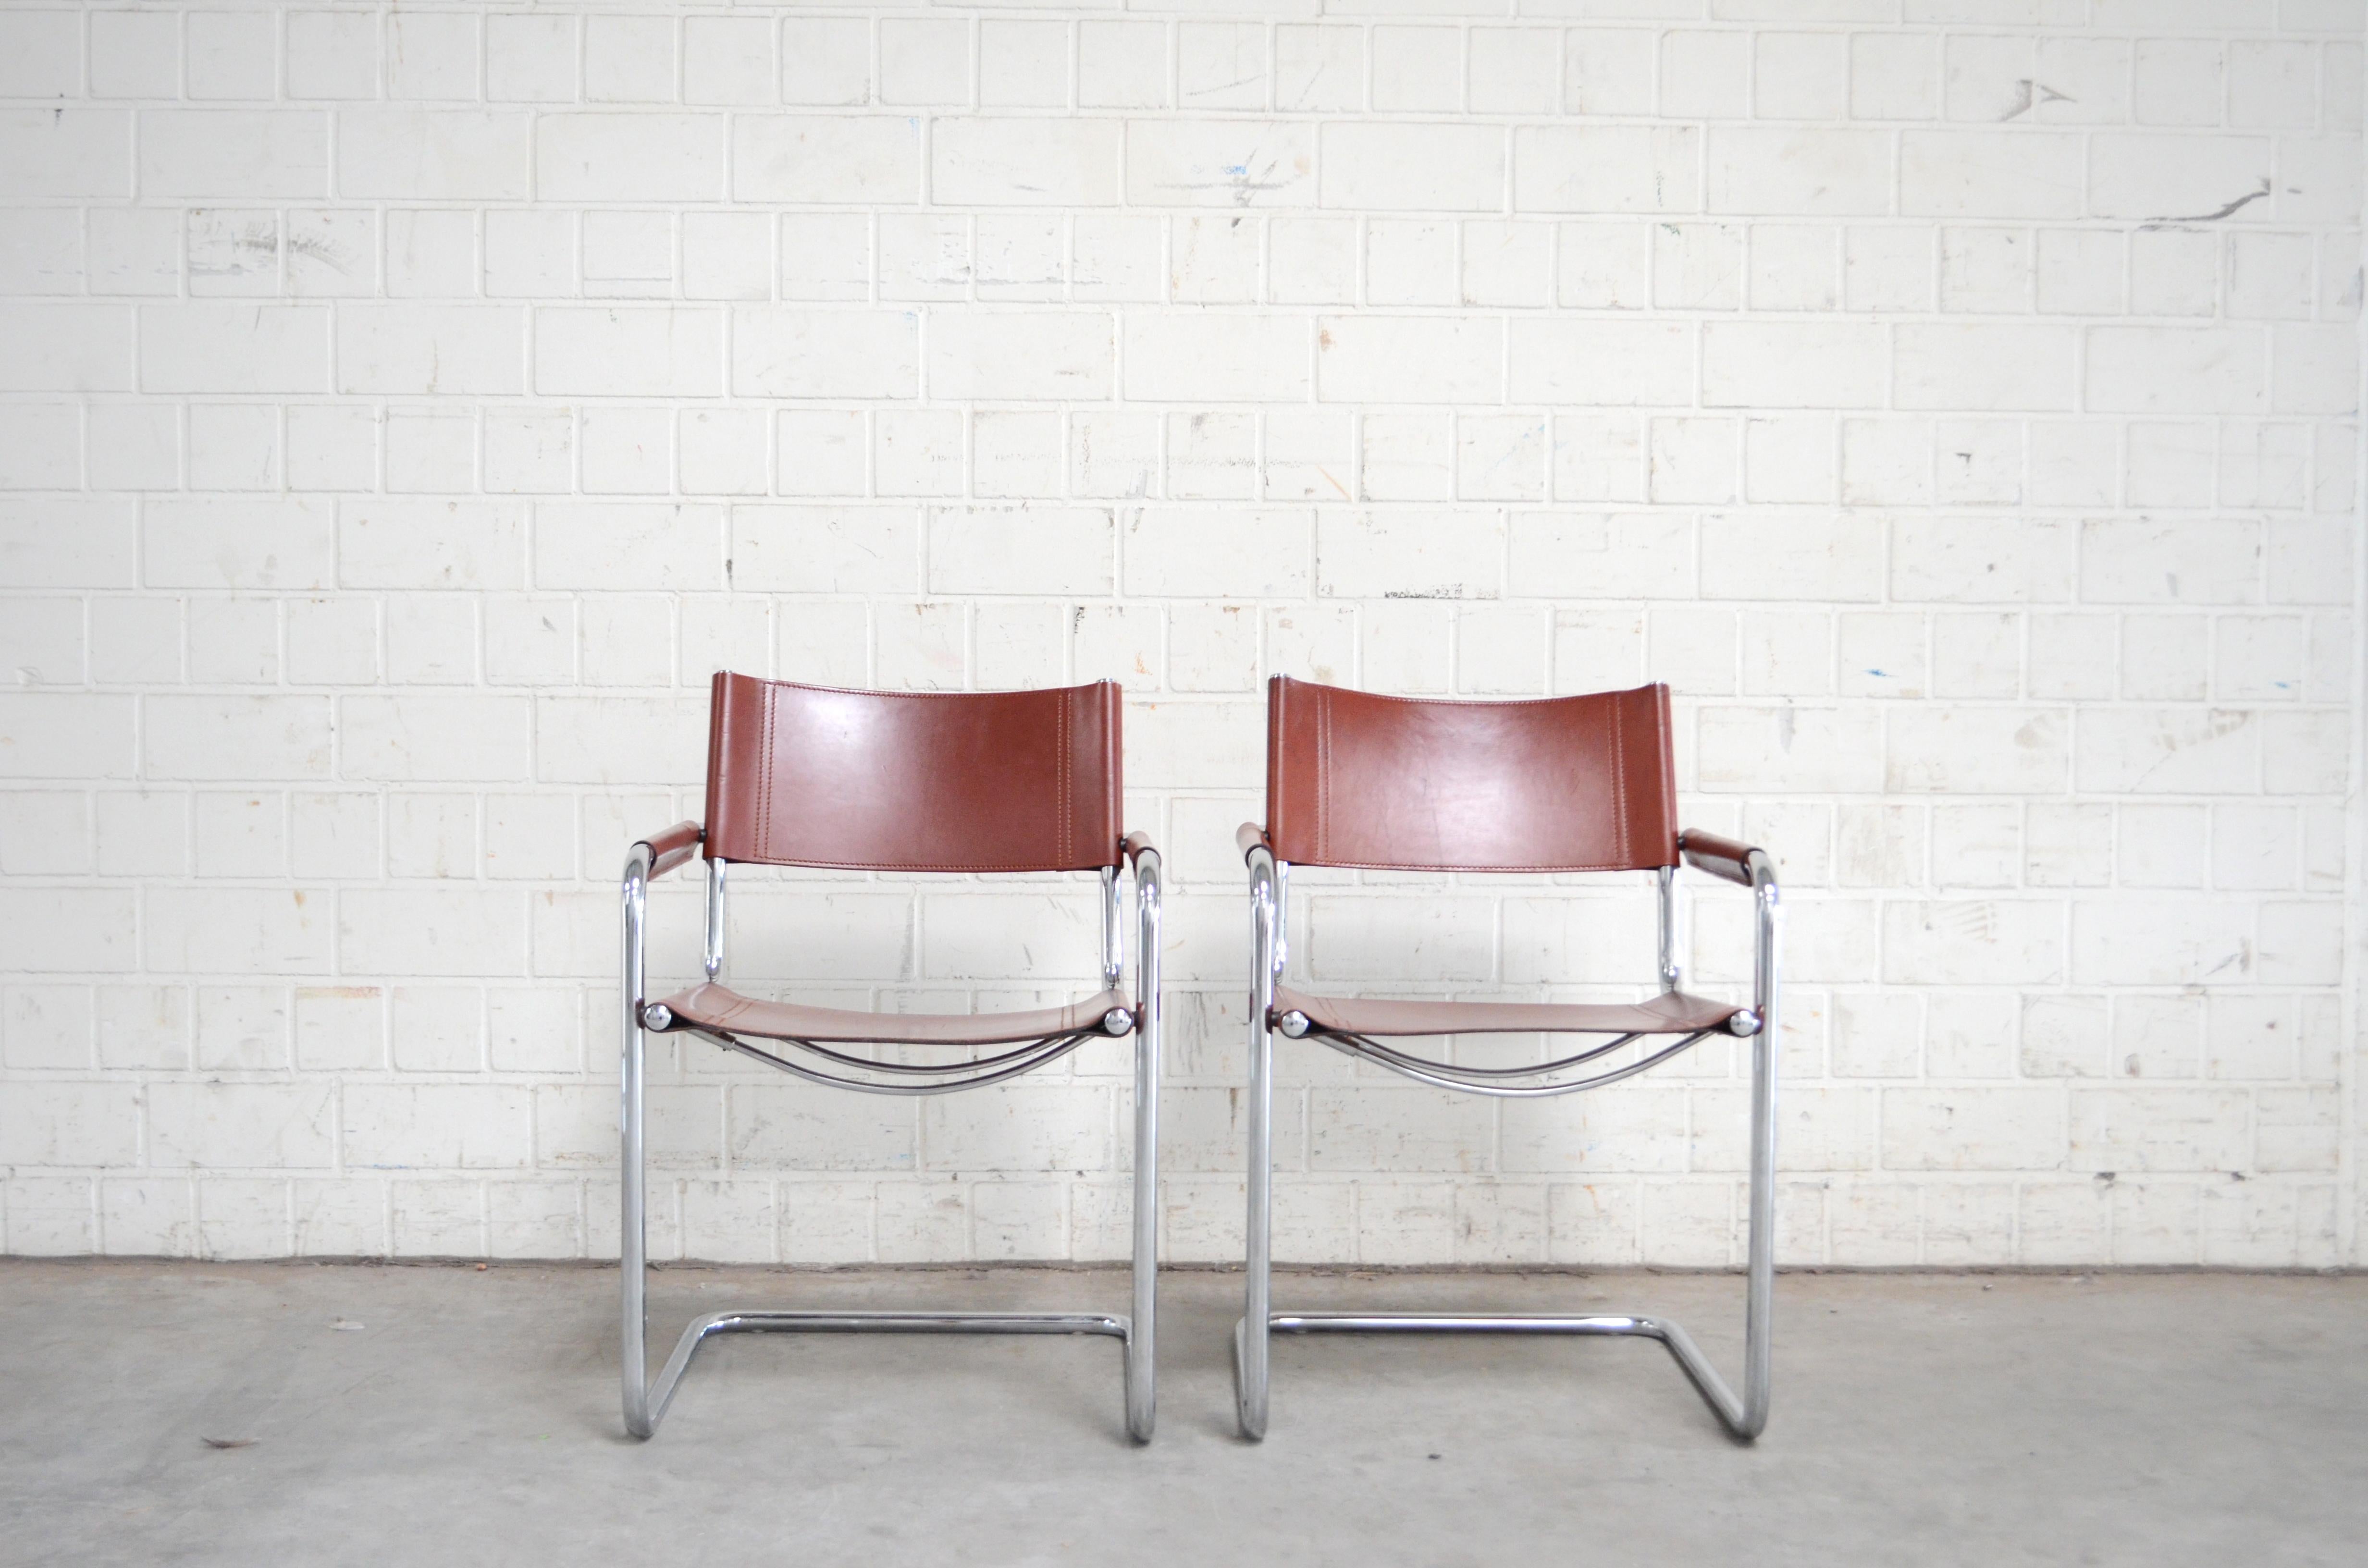 Cantilever chair by Centro Studi for Matteo Grassi Modell MG5.
Tubular chrome steel frame and ox red leather.
Set of 2.